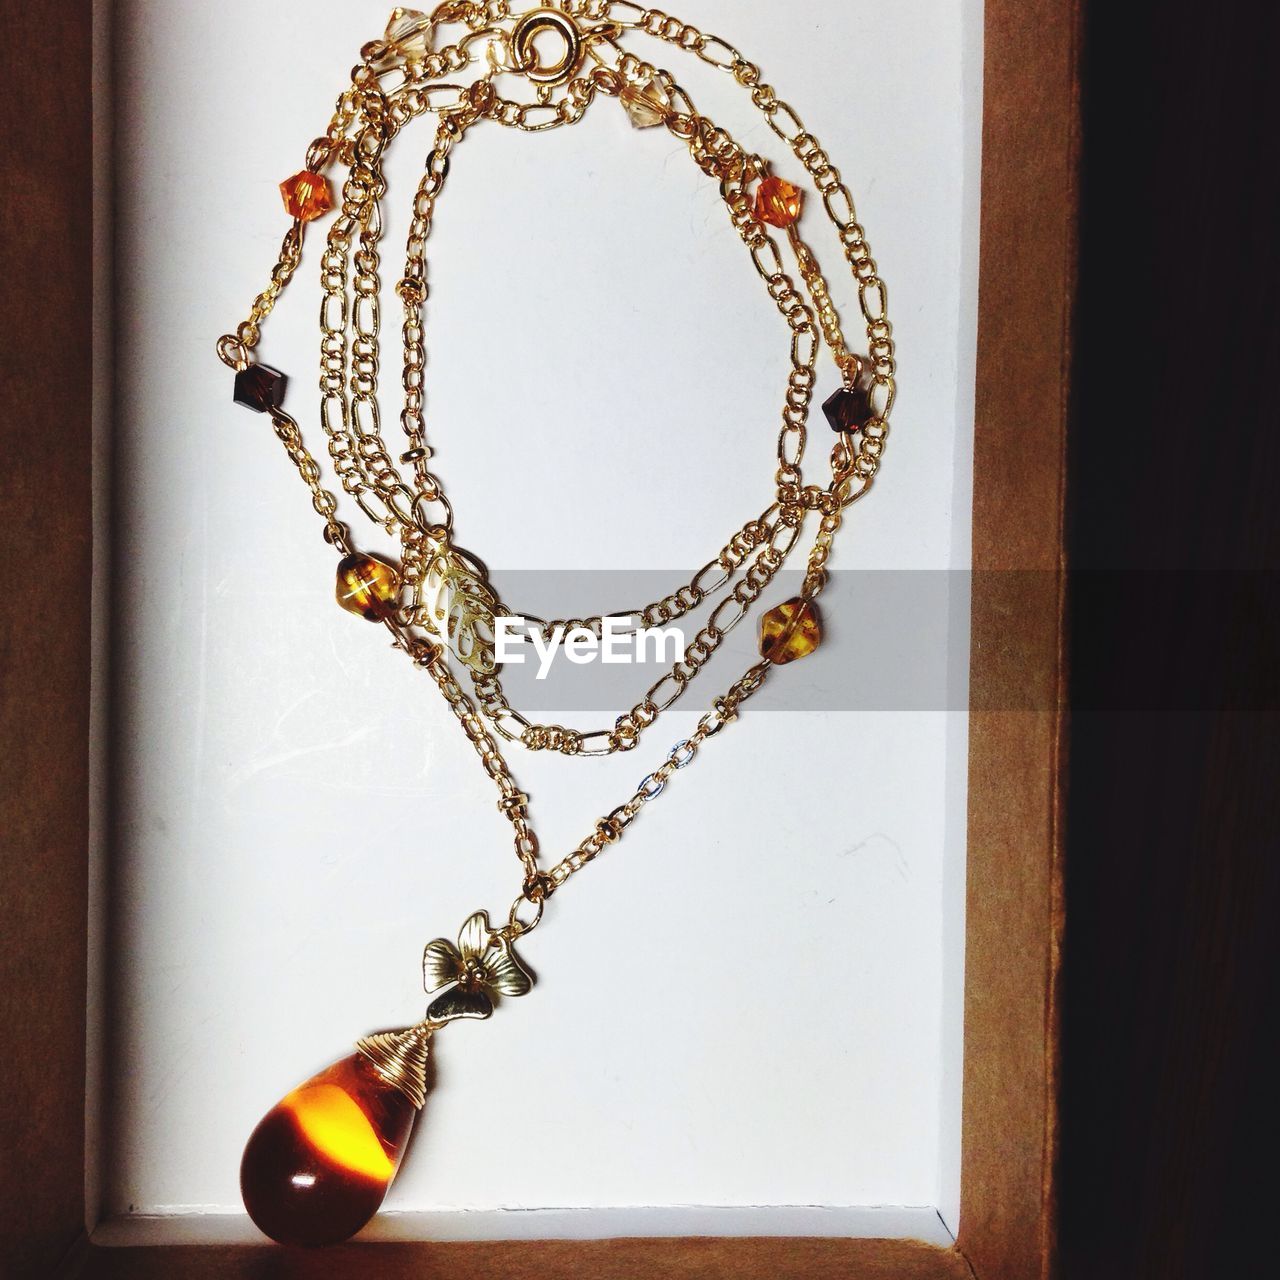 jewellery, necklace, fashion accessory, indoors, jewelry, no people, art, chain, hanging, close-up, yellow, gold, wood